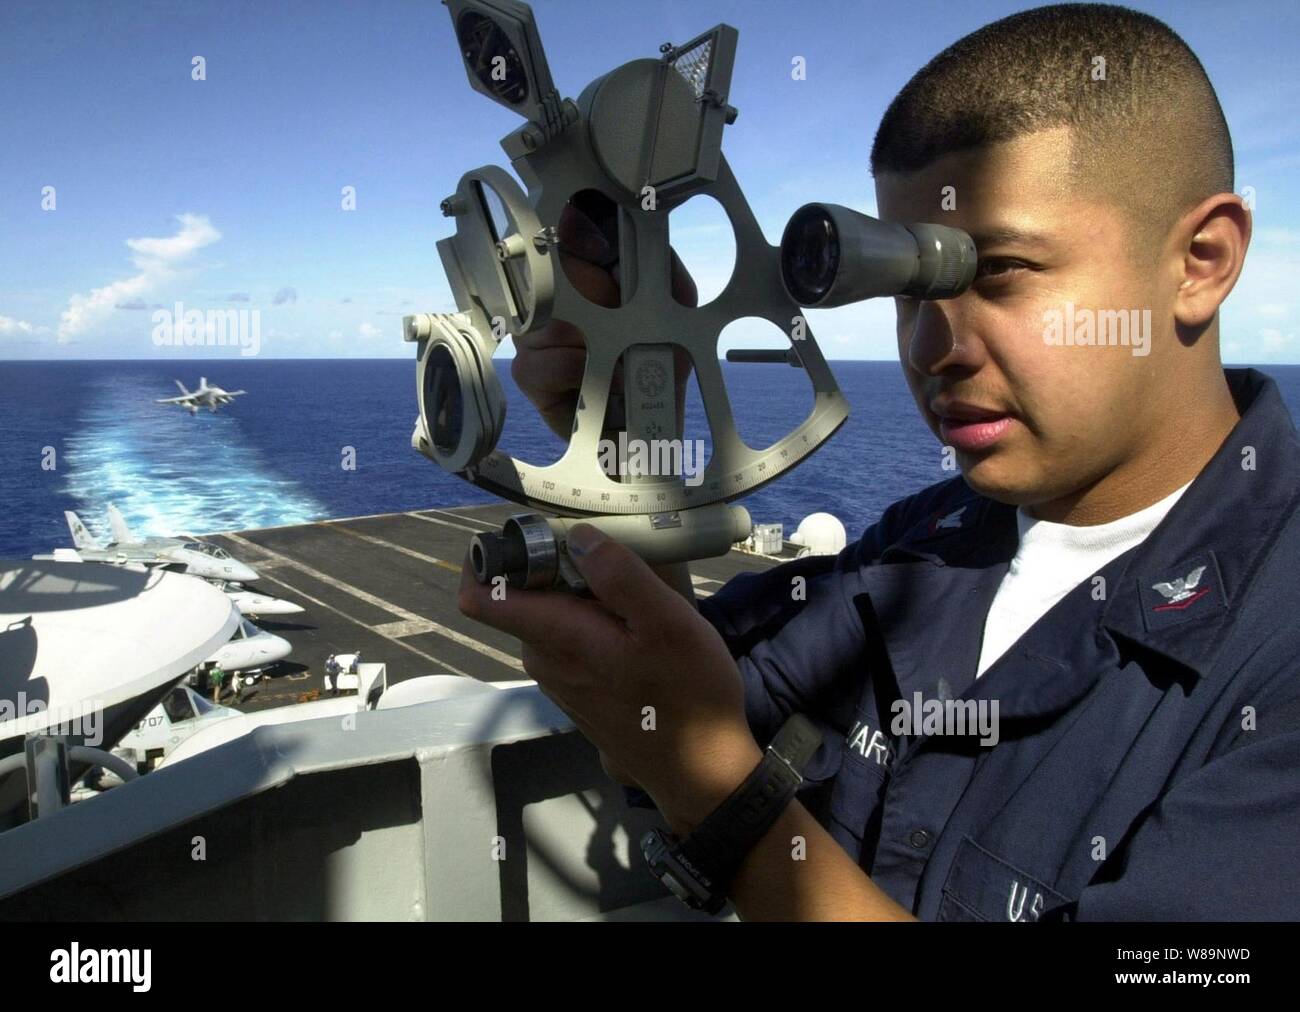 Petty Officer 3rd Class Michael Alvarez uses a sextant to plot the navigational position of the USS Abraham Lincoln (CVN 72) at sea on Sept. 3, 2000.  Alvarez, from Los Angeles, Calif., is a Navy quartermaster onboard the aircraft carrier.  The Lincoln, its embarked Carrier Air Wing 14 and the Lincoln Battle Group are en route to the Persian Gulf on a routine six-month deployment. Stock Photo